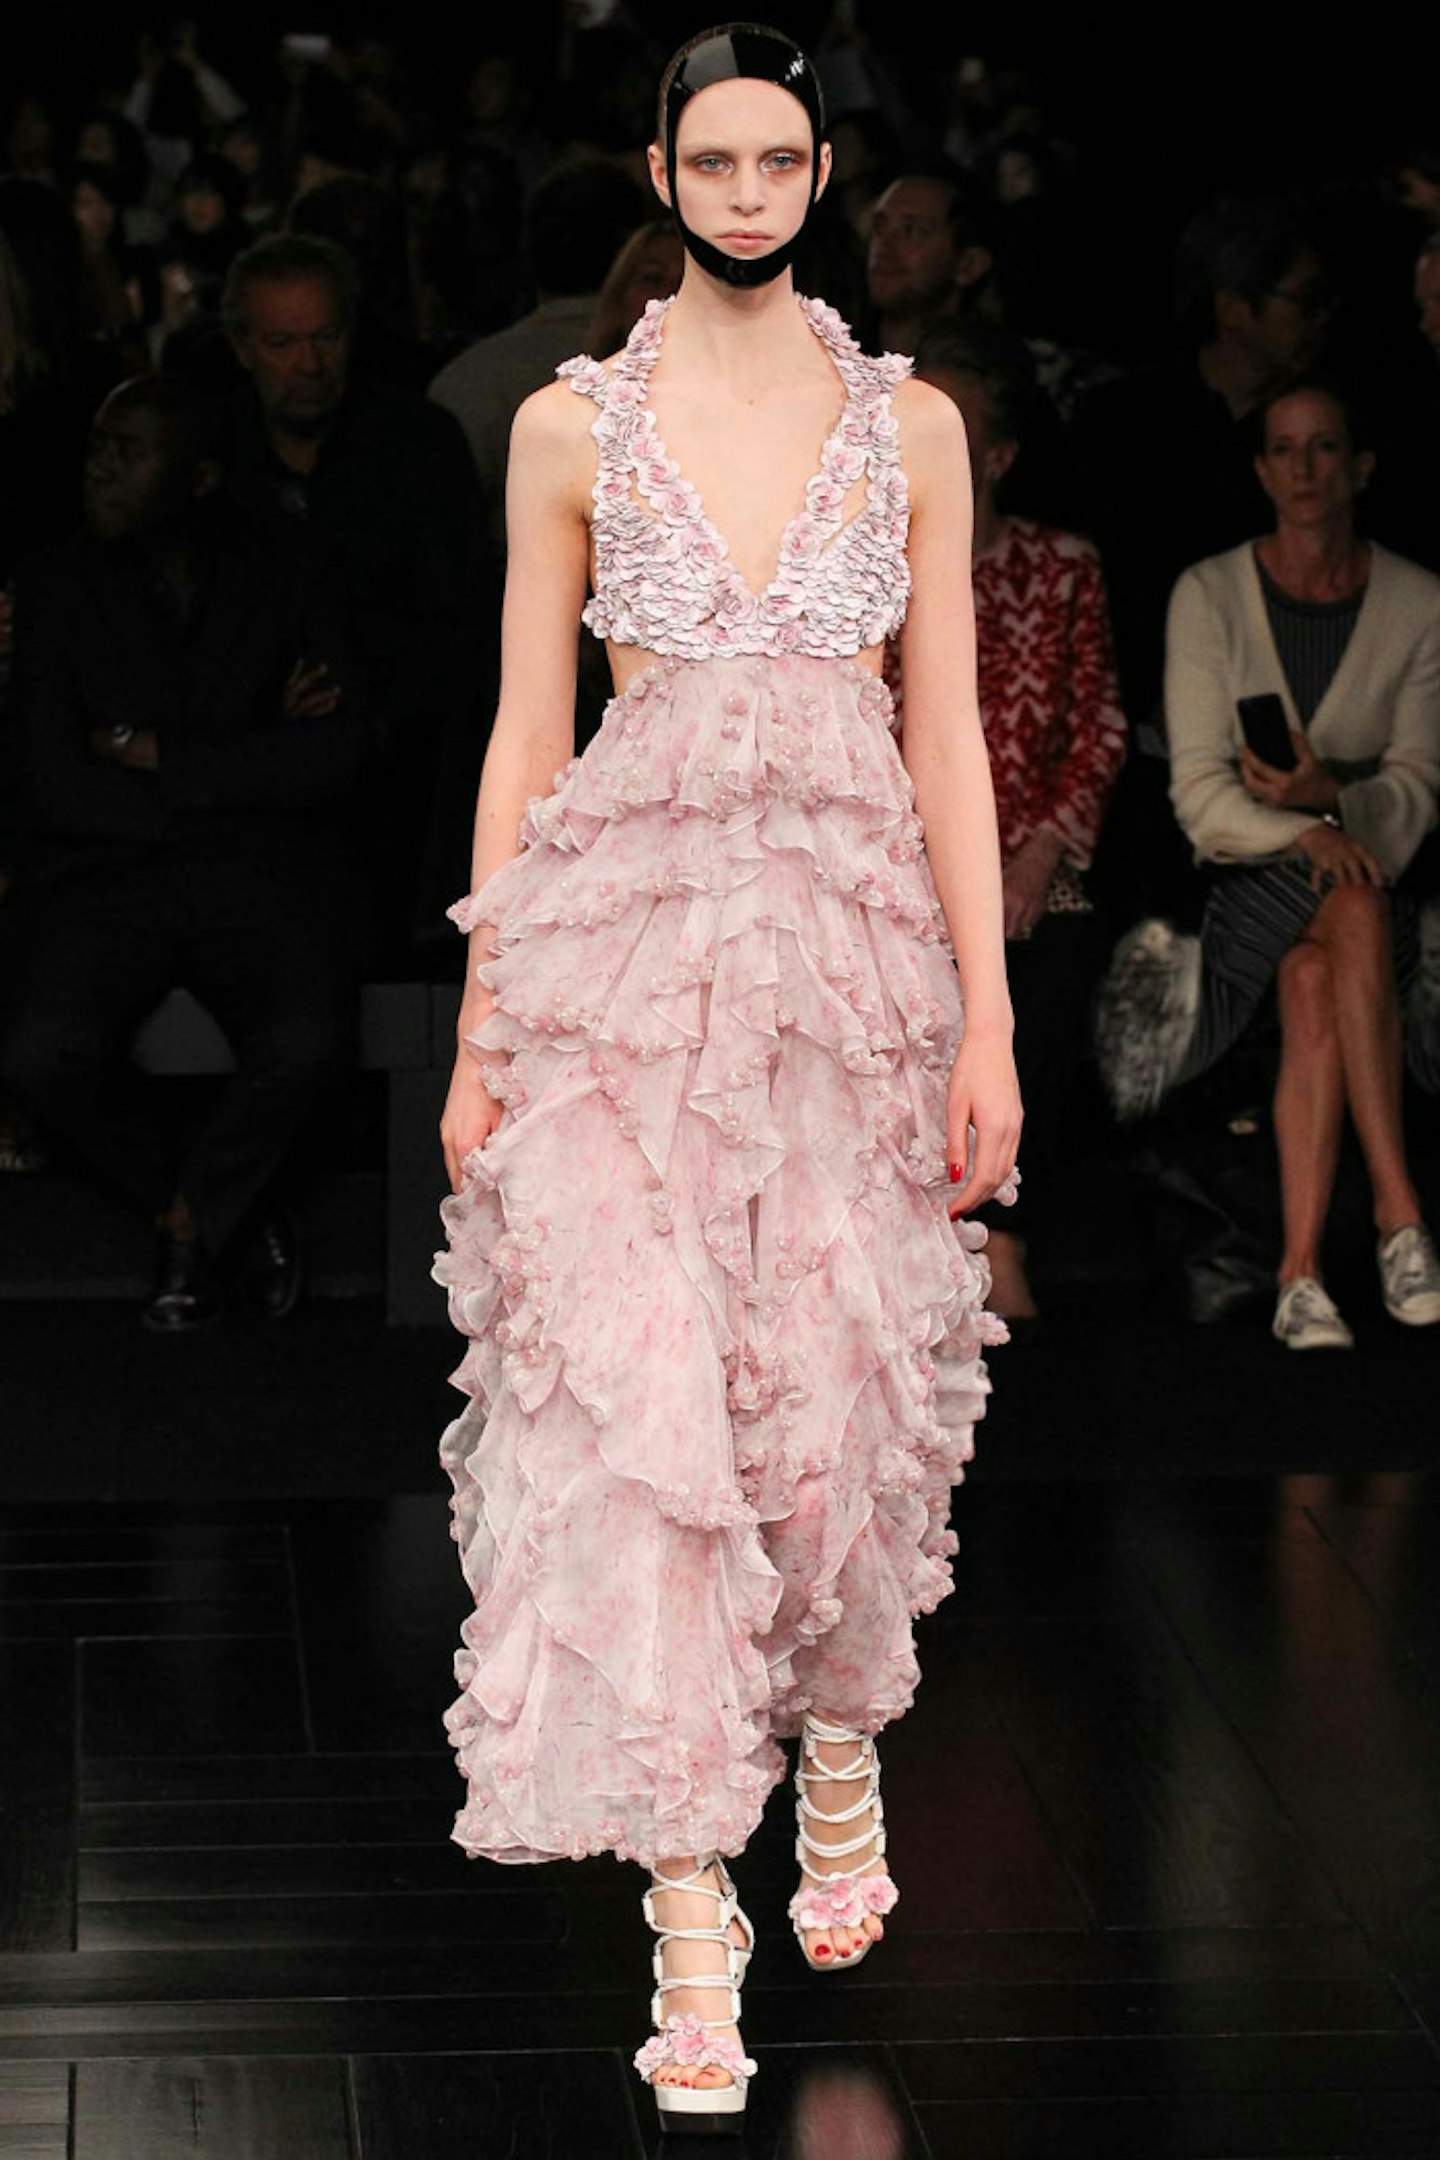 Minus the head piece, Sienna really work these ruffles from McQueen.